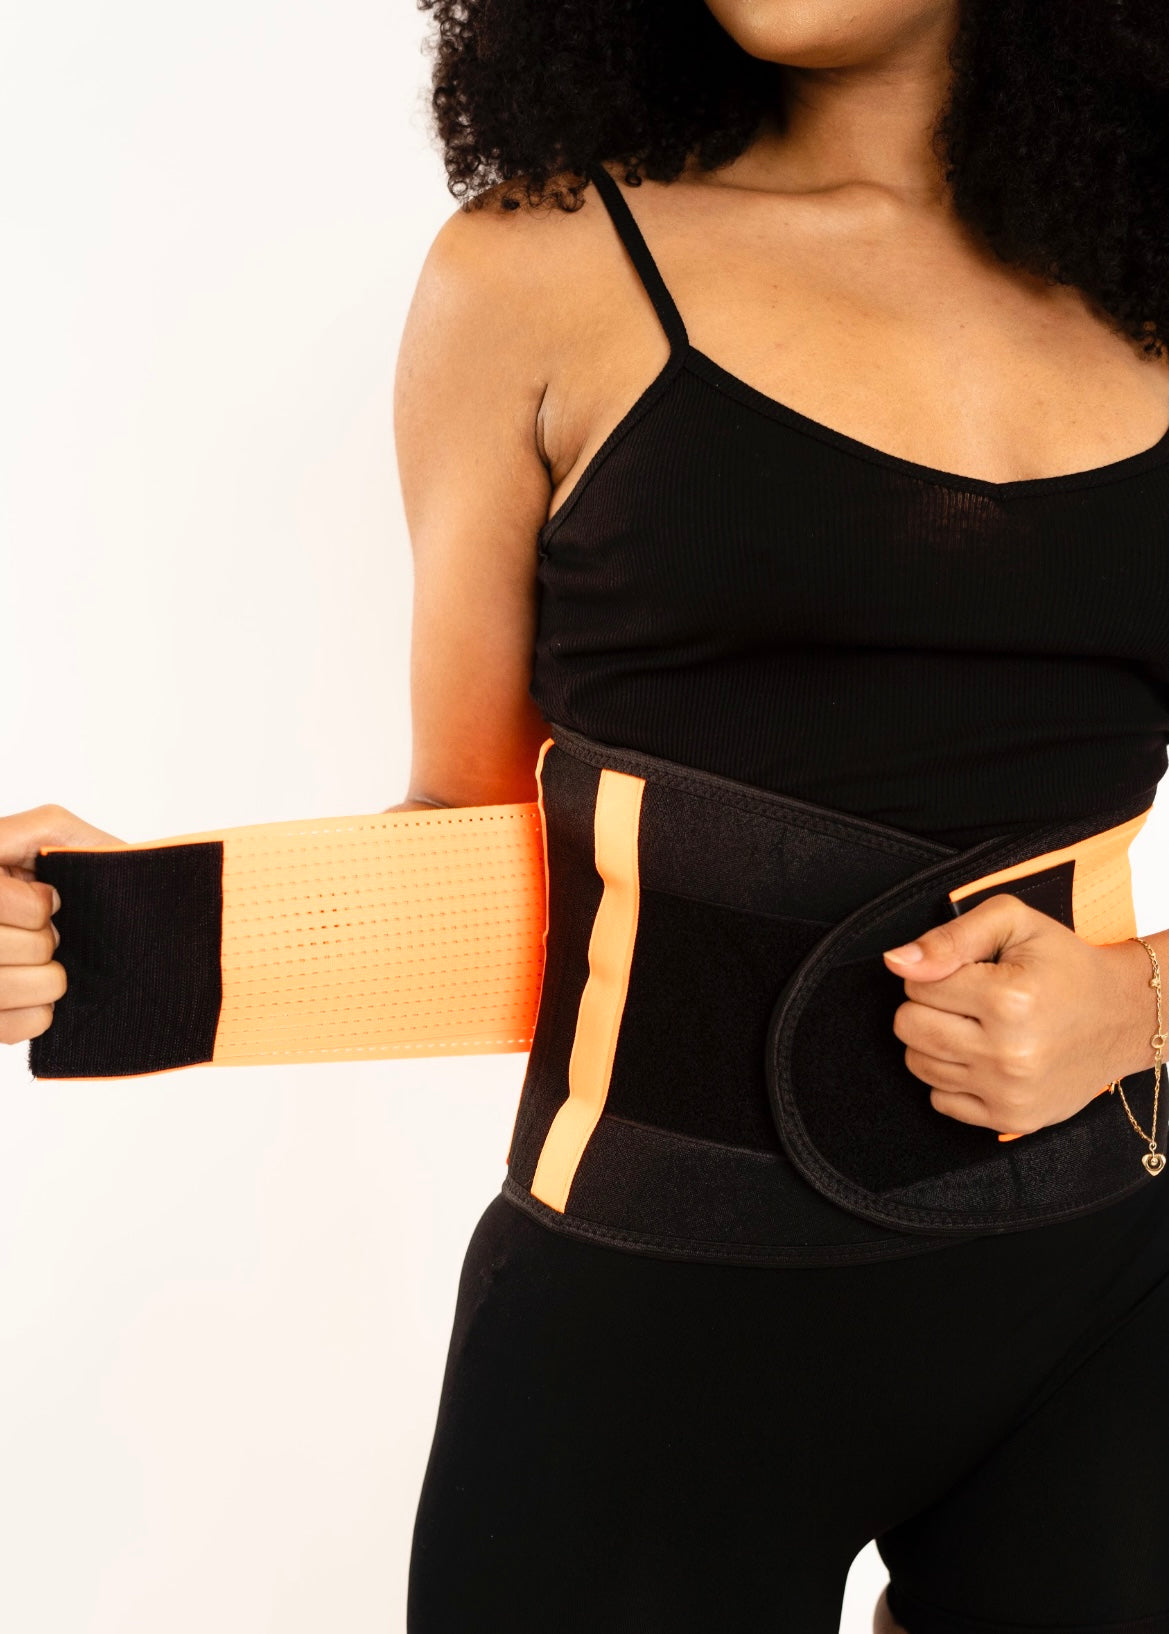 Buy adjustable slimming hot waist sweat belt Wholesale From Experienced  Suppliers 